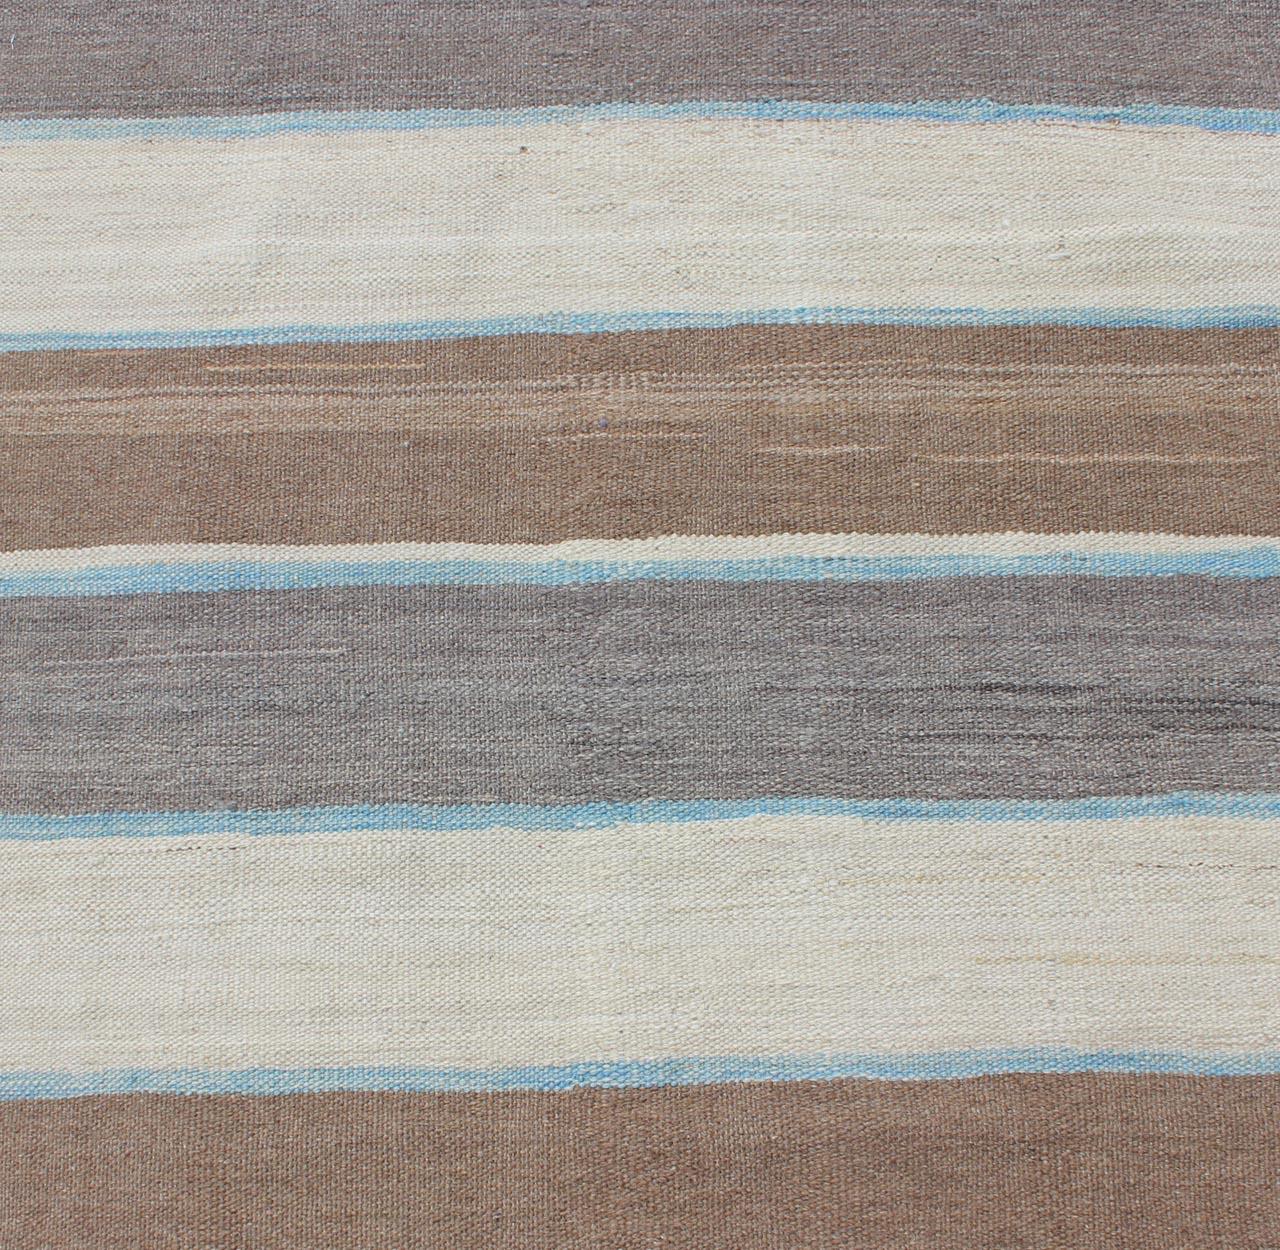 Contemporary Modern Kilim Rug with Stripes in Shades of Blue, Taupe, Gray and Cream Runner For Sale